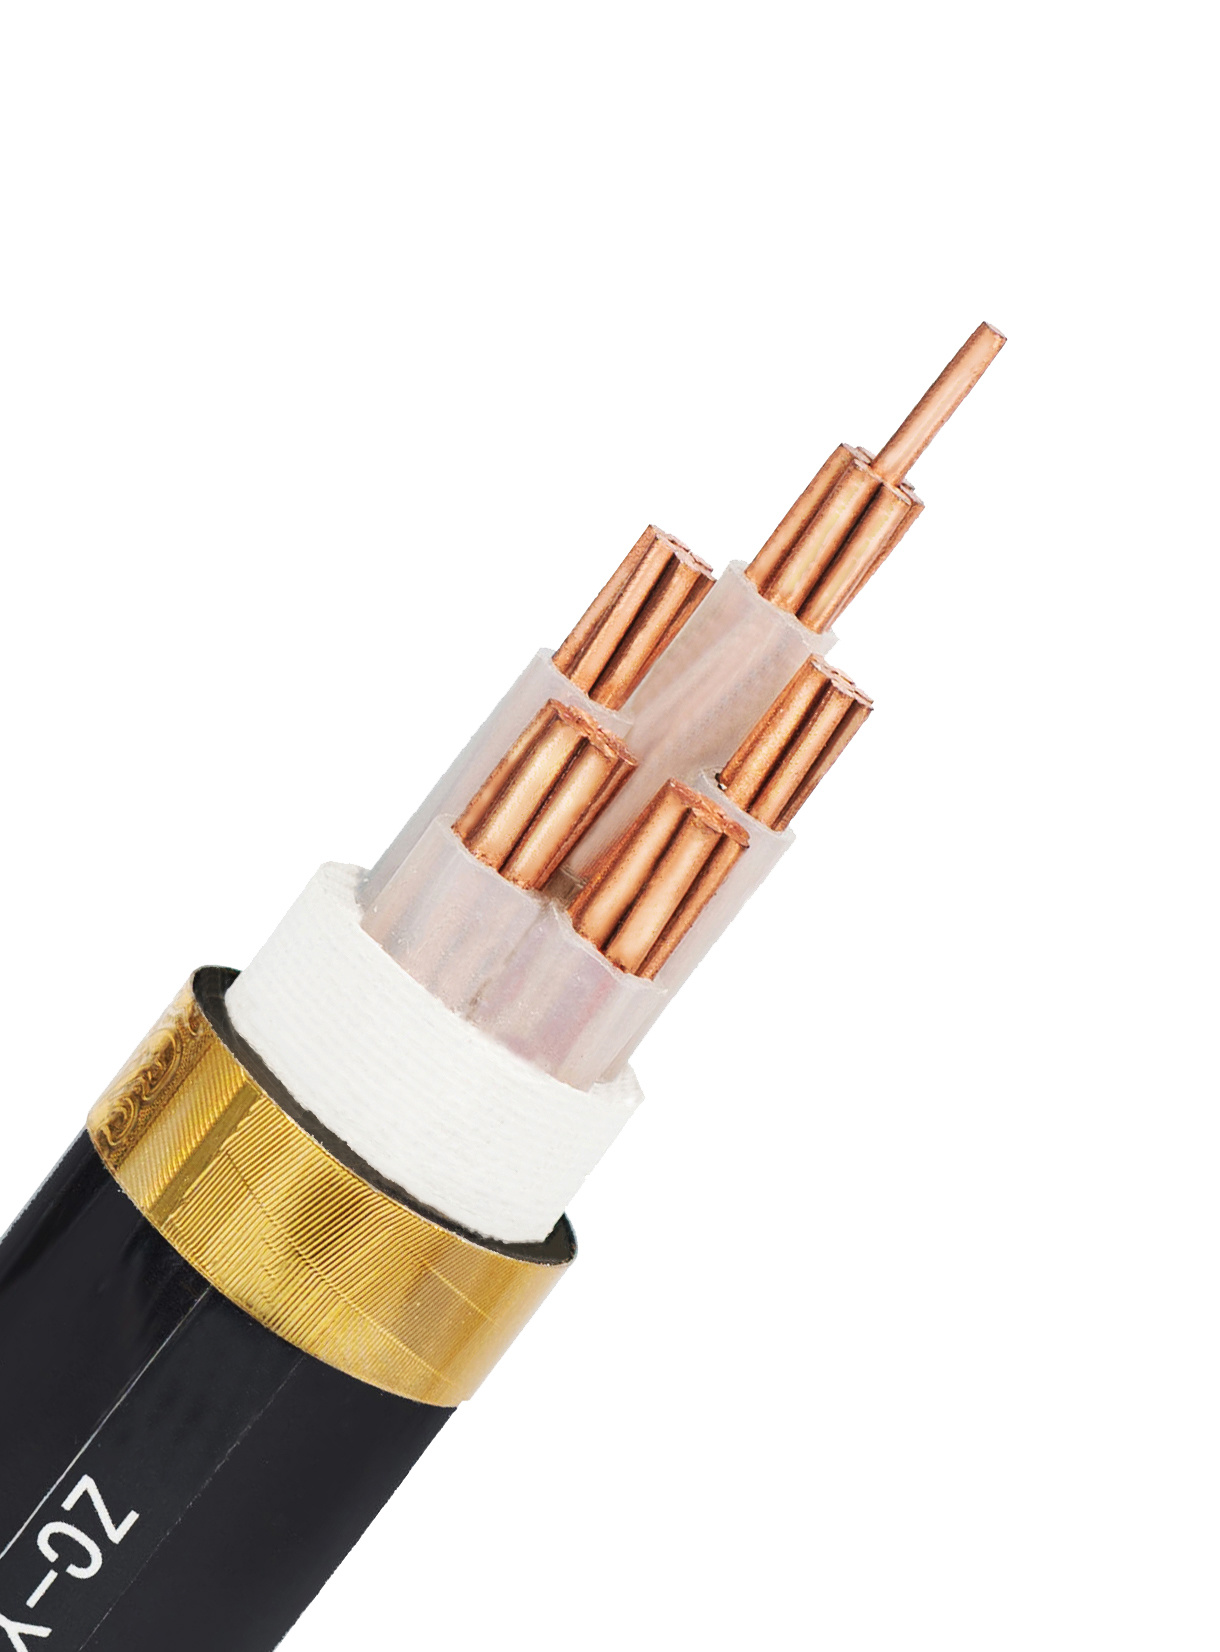 Hot Selling 0.6/1kv Electric Aluminum Conductor PVC/XLPE/PE Insulated PVC Sheathed Low/Medium Power Cable Aluminum Conductor Underground Cable